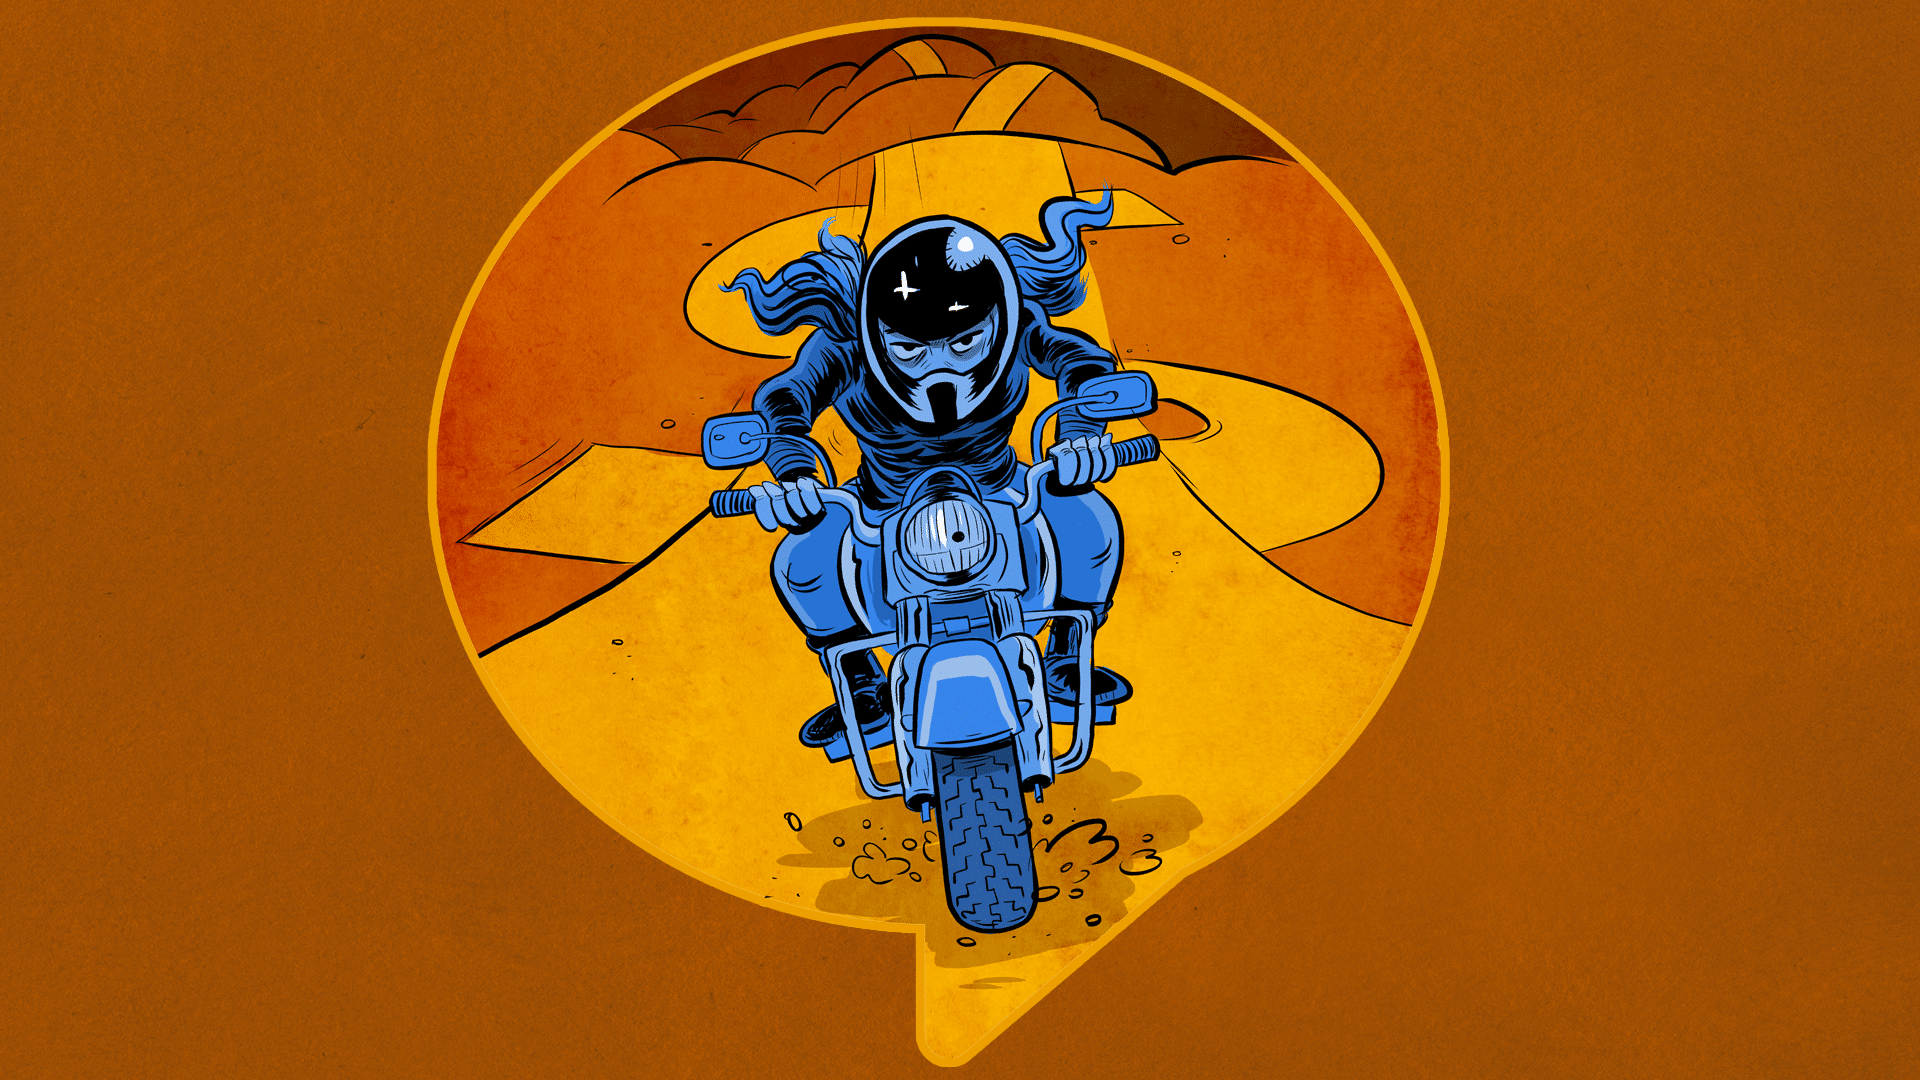 A woman on a motorcycle riding on a road shaped like a dollar sign.